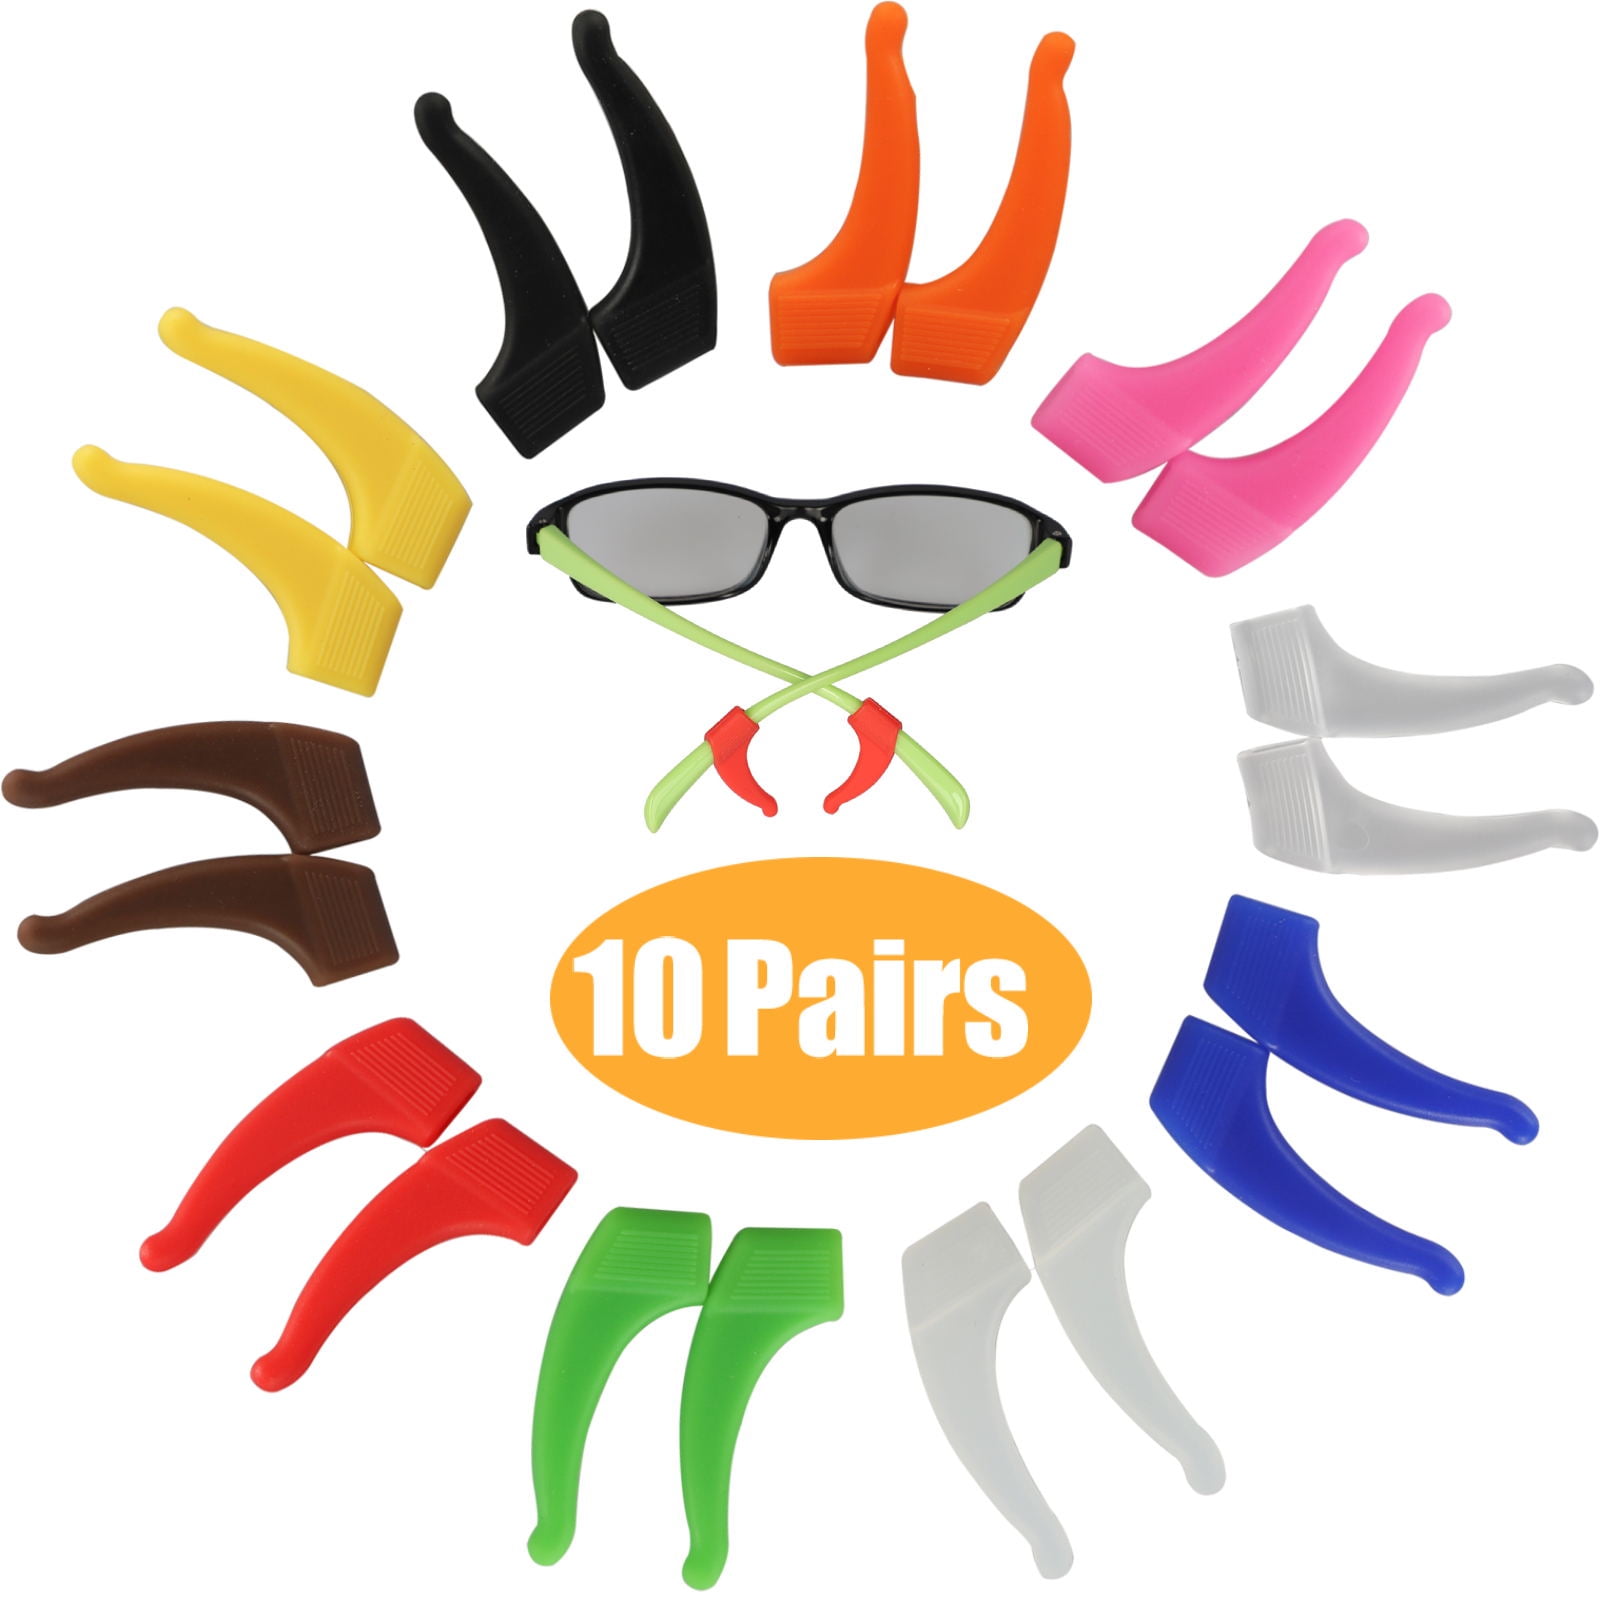 Kegiani 10 Sets Glasses Stapes with Eyeglasses Ear Grip Hooks Anti Slip Glasses Holder for Kids and Adult Sport Silicone Spectacles Cord Sunglasses Retainer 